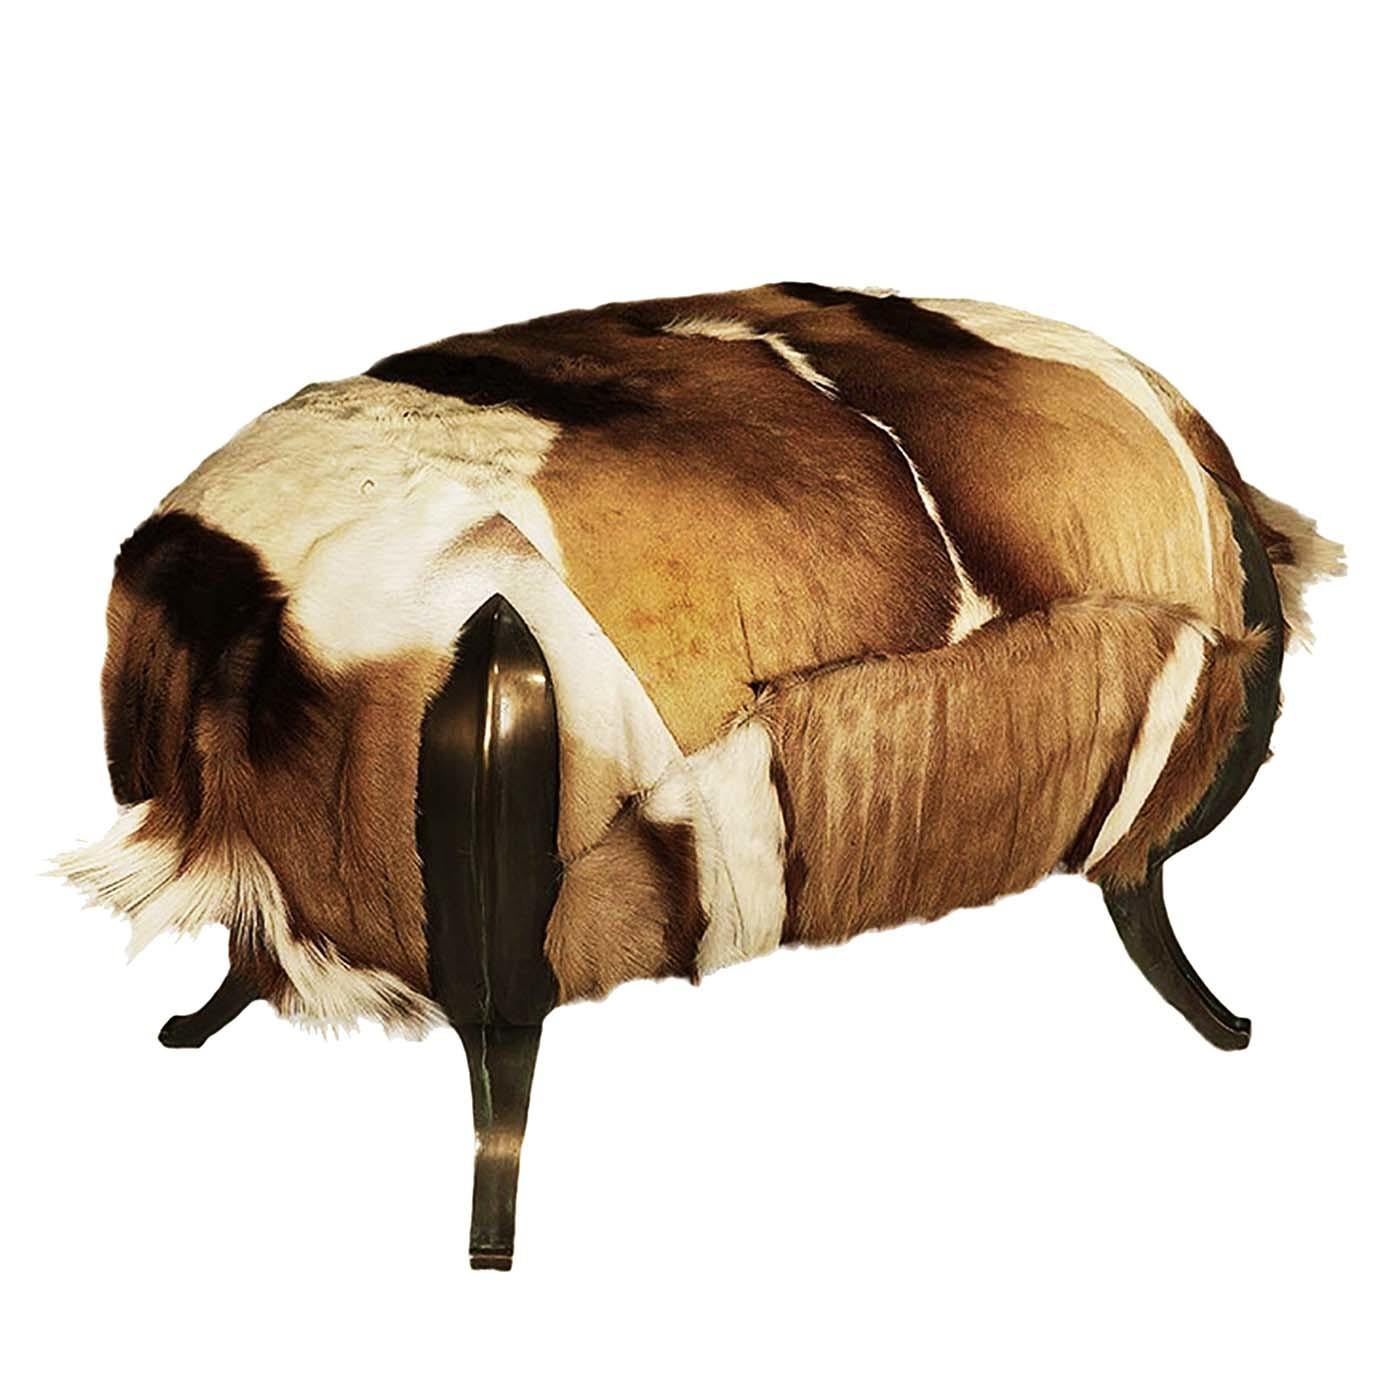 This stunning pouf is a perfect accent piece for a rustic or modern interior that will be enriched by the presence of Antelope fur upholstery. The textured and refined cover is a one-of-a-kind decorative cover in white and light brown that elevates